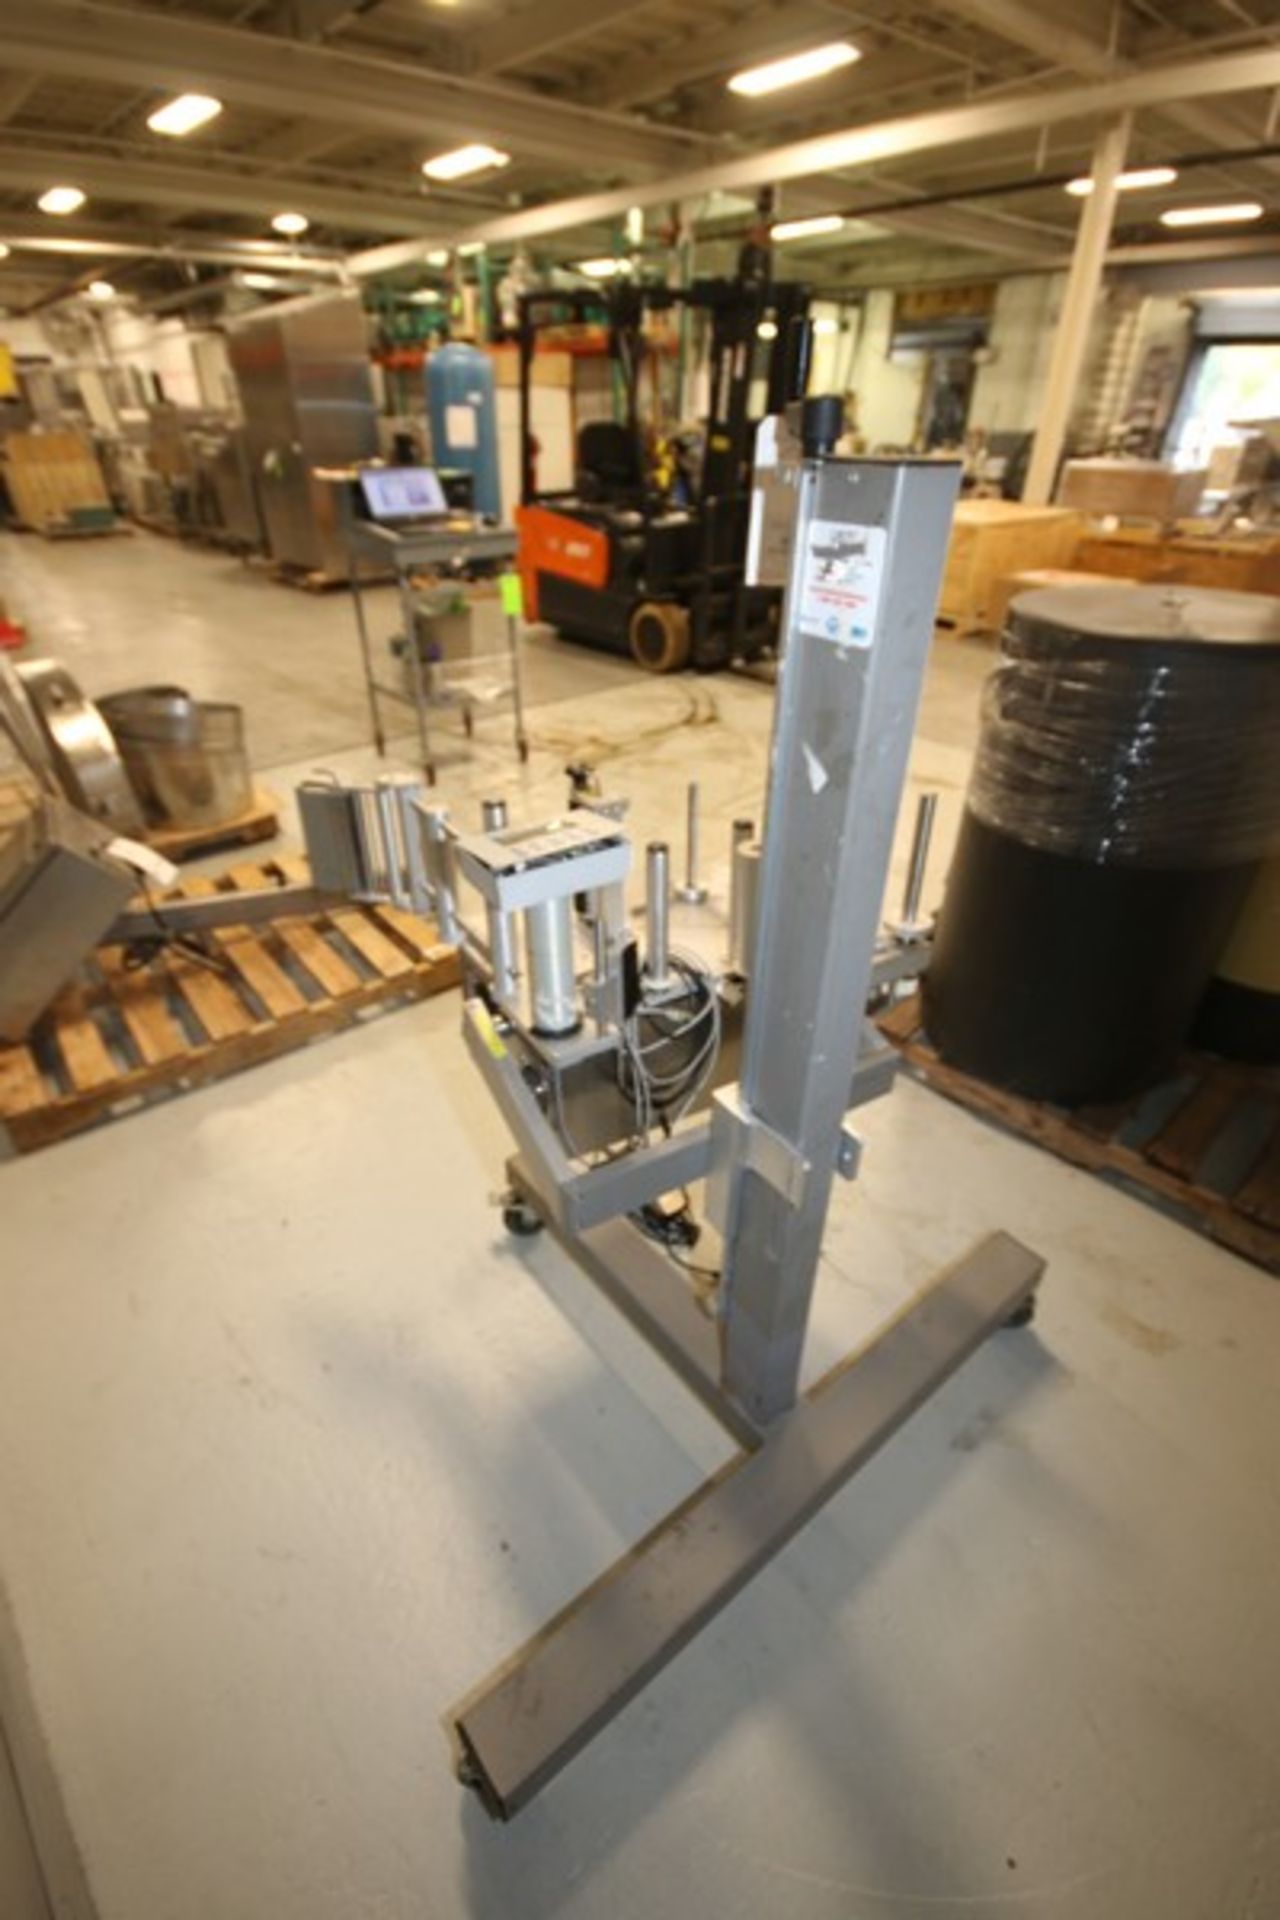 Label-Aire Inc. Labeler,M/N 3115NV-1500 7" 16" RH, S/N 0366611506, 120 Volts, 1 Phase, Mounted on